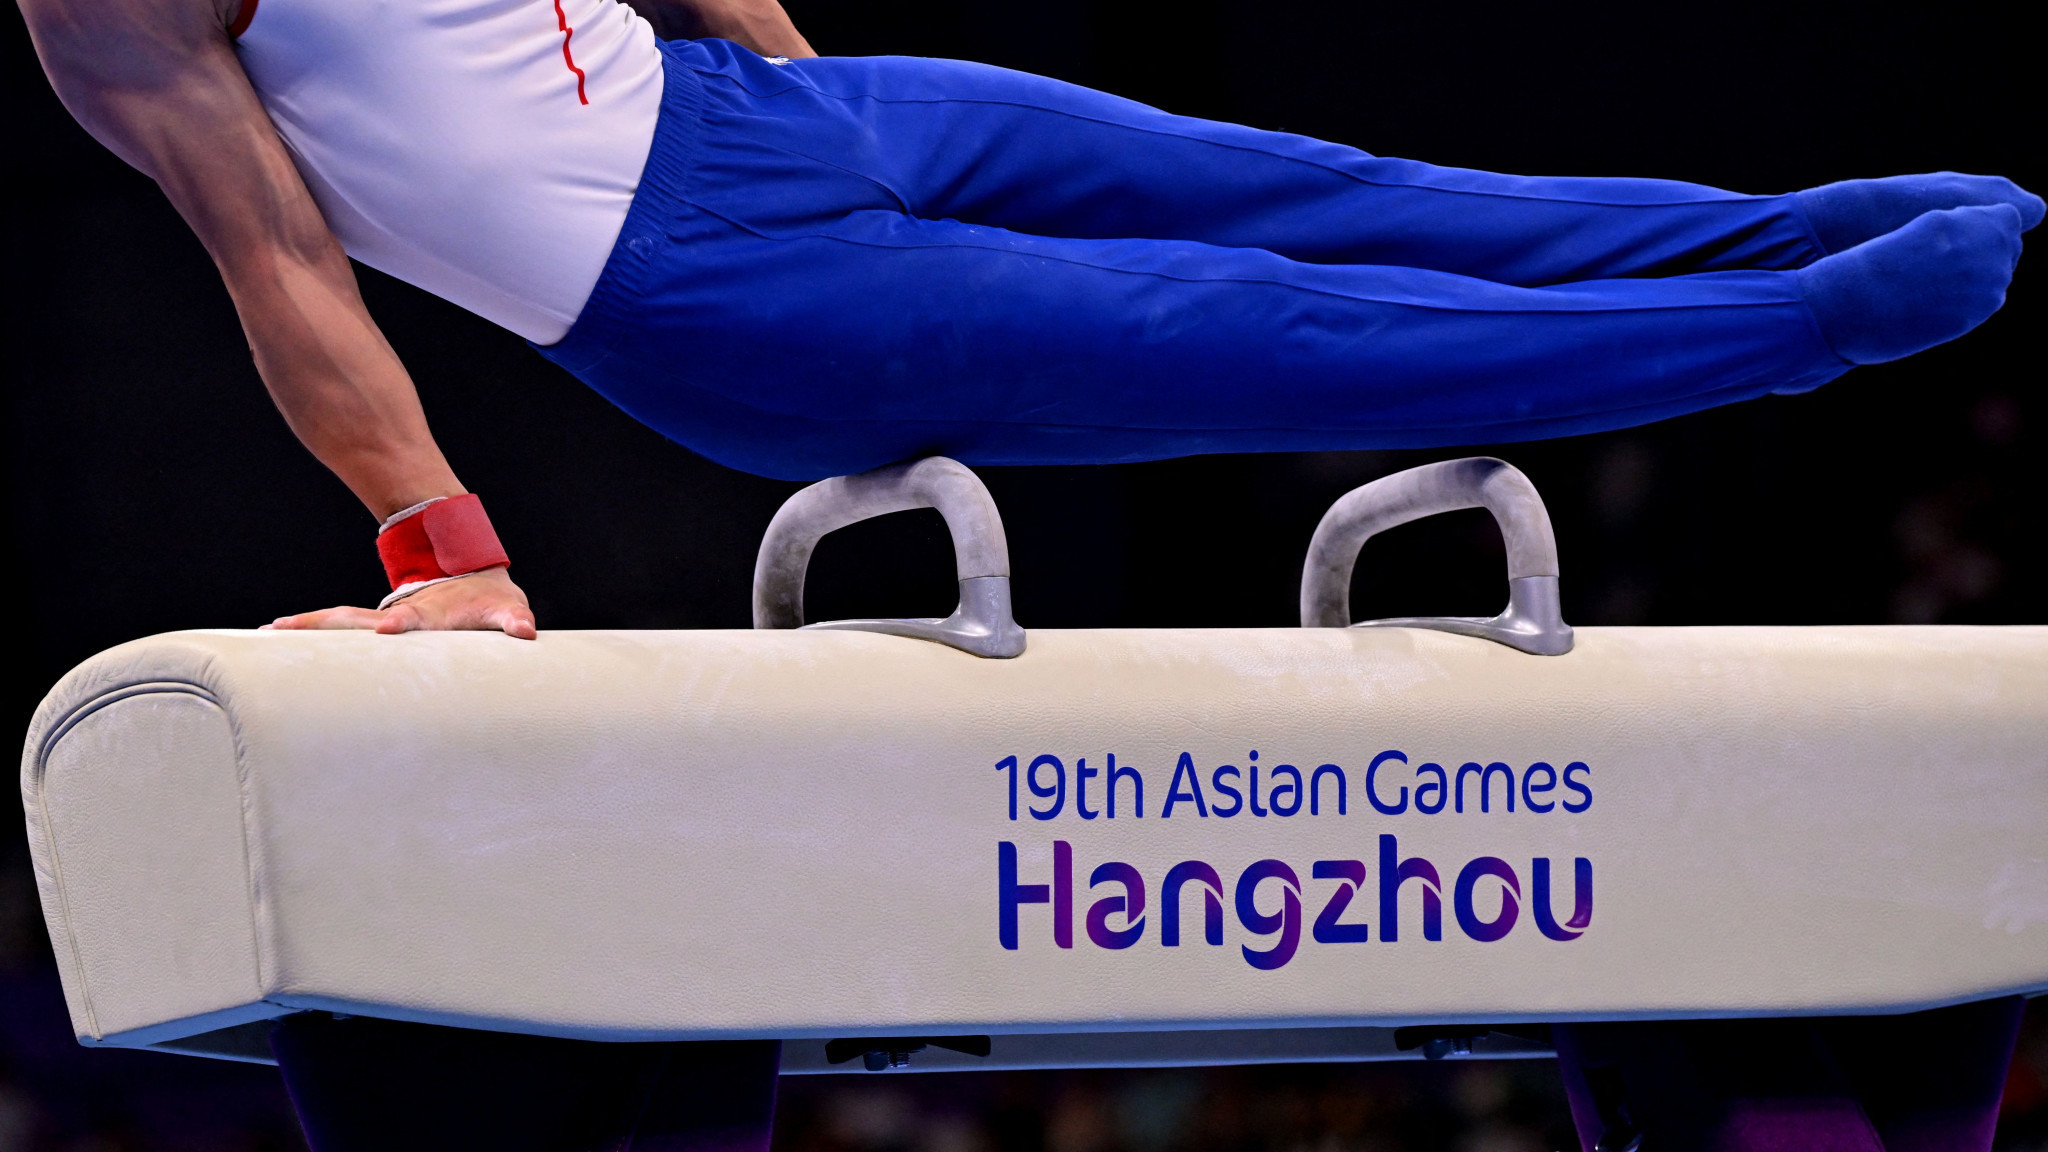 Hangzhou 2022 Asian Games: Day three of competition